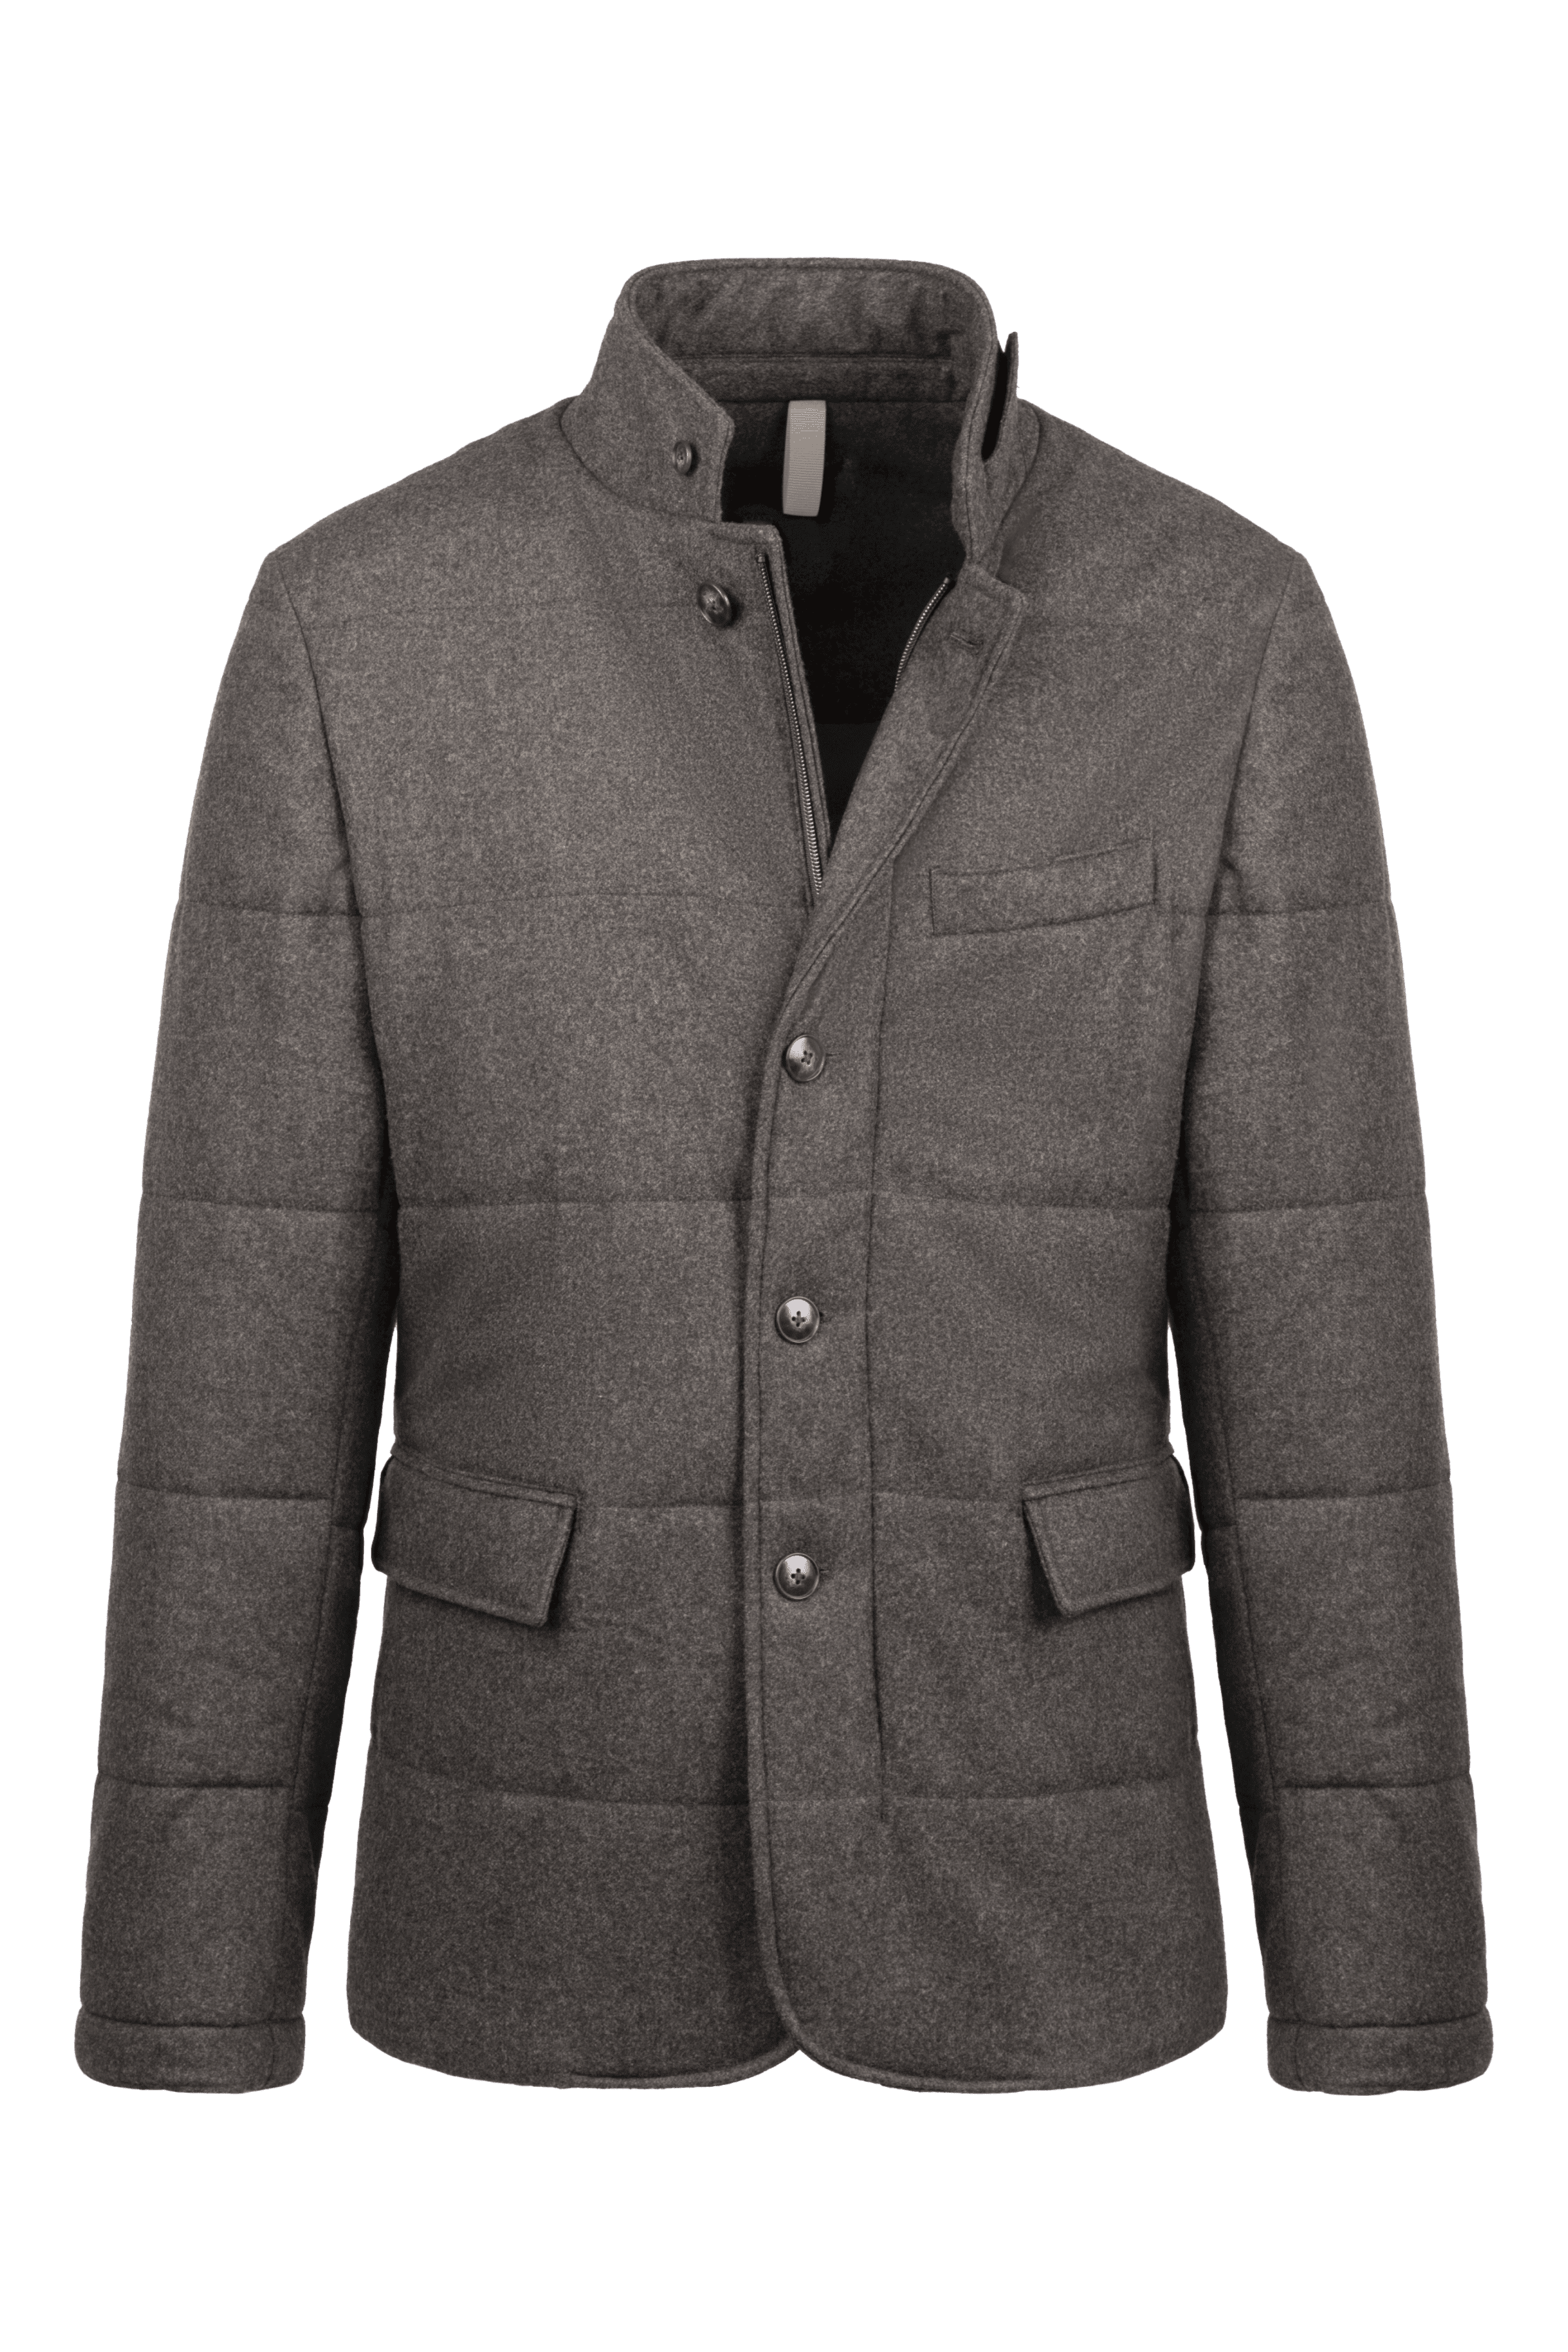 Knot Standard Taupe Quilted Coat by Knot Standard